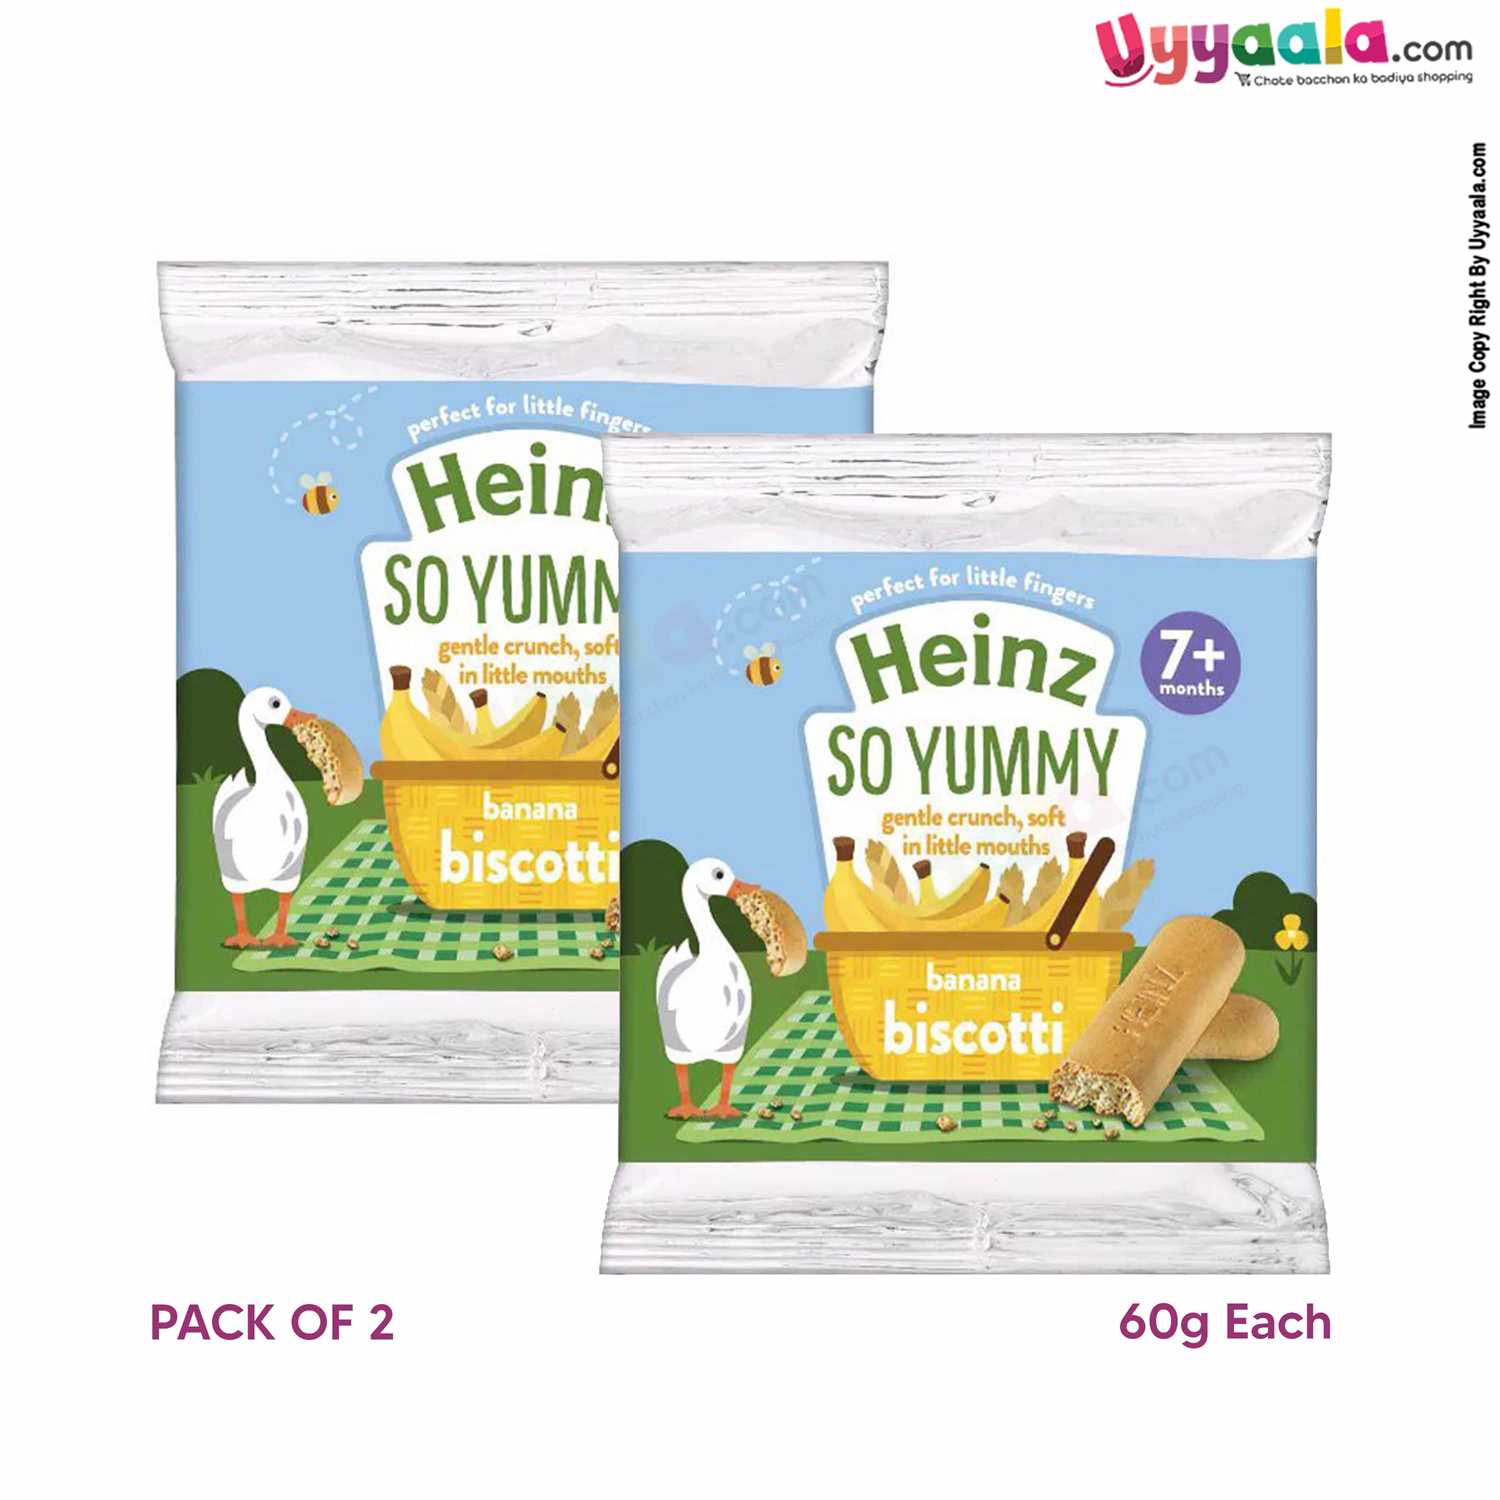 HEINZ SO YUMMY Banana biscotti for Kids snacks Pack of 2 - Banana Biscuits (60 g each), 7months+